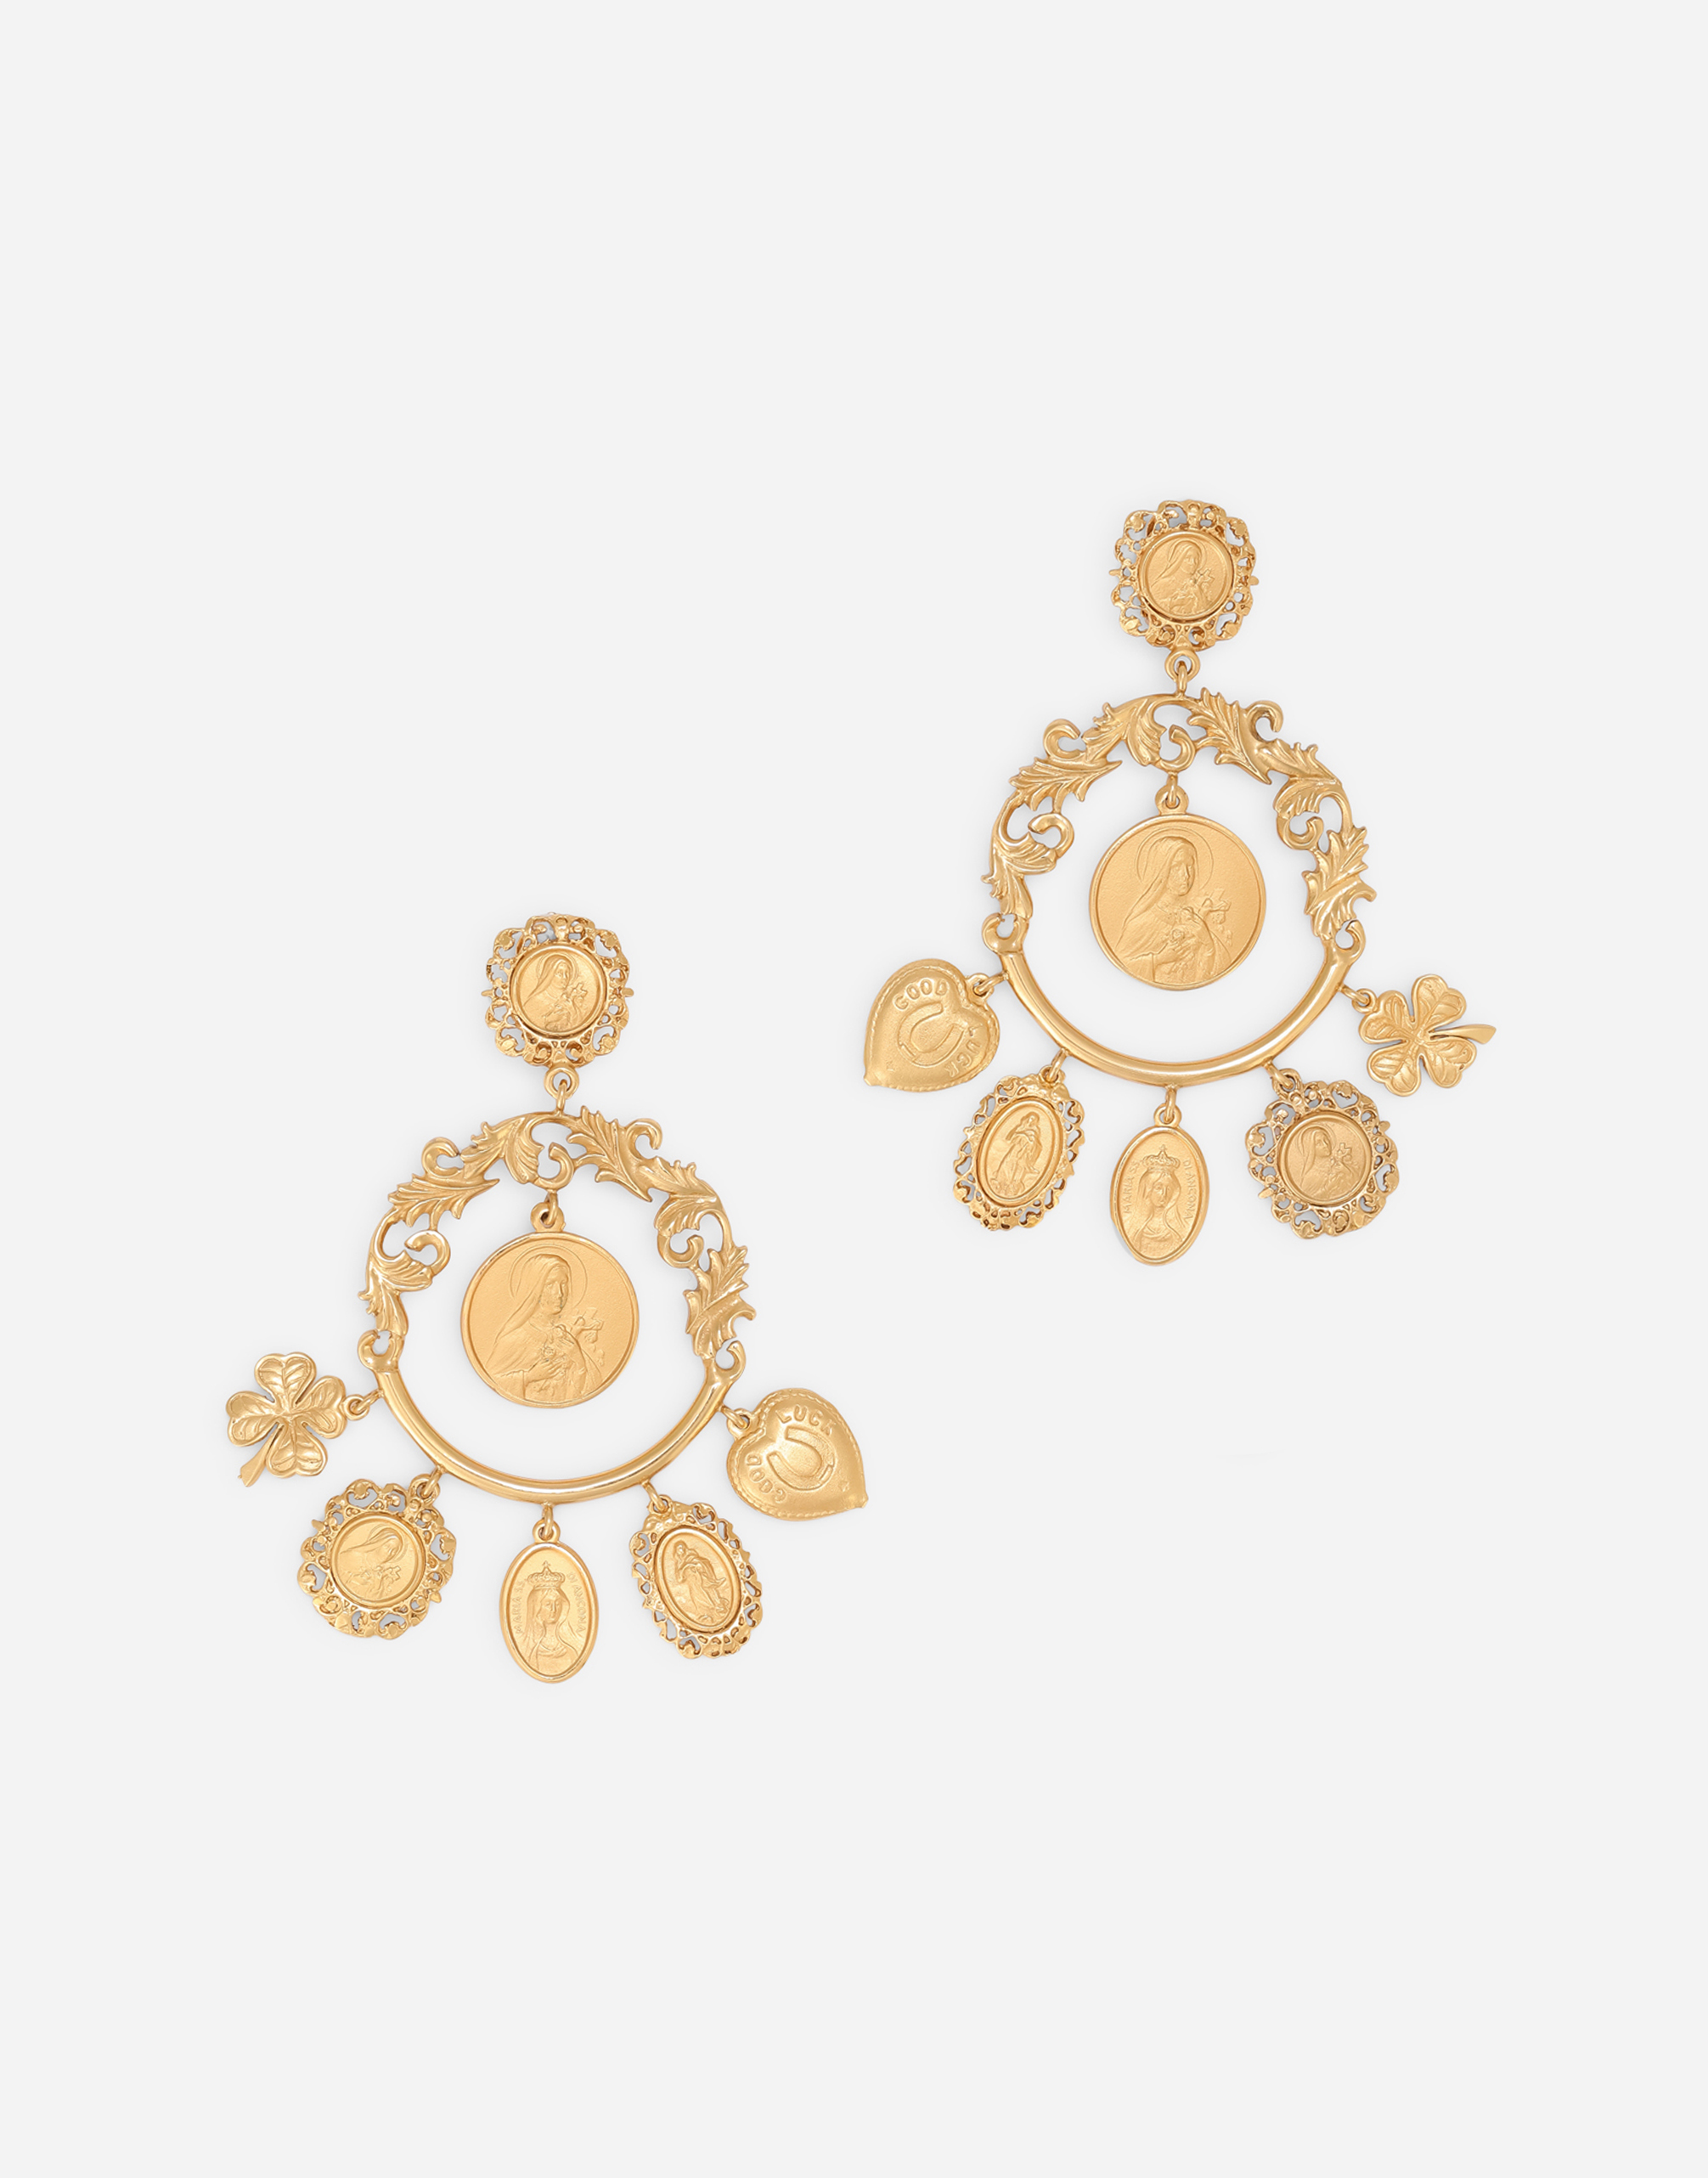 Drop hoop earrings with decorative details in Gold